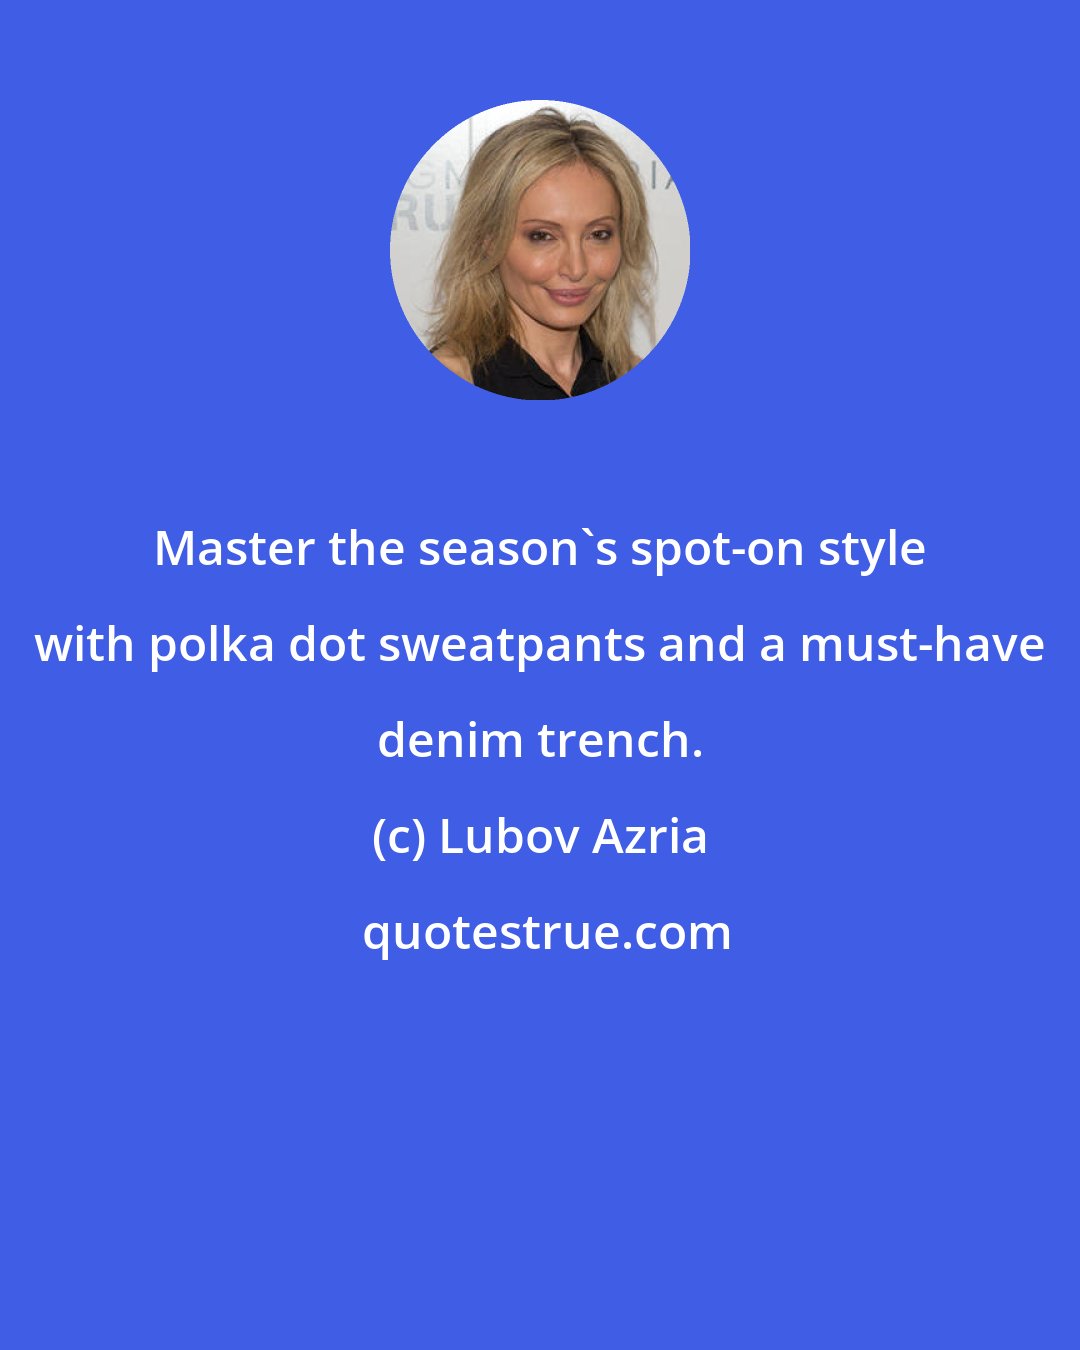 Lubov Azria: Master the season's spot-on style with polka dot sweatpants and a must-have denim trench.